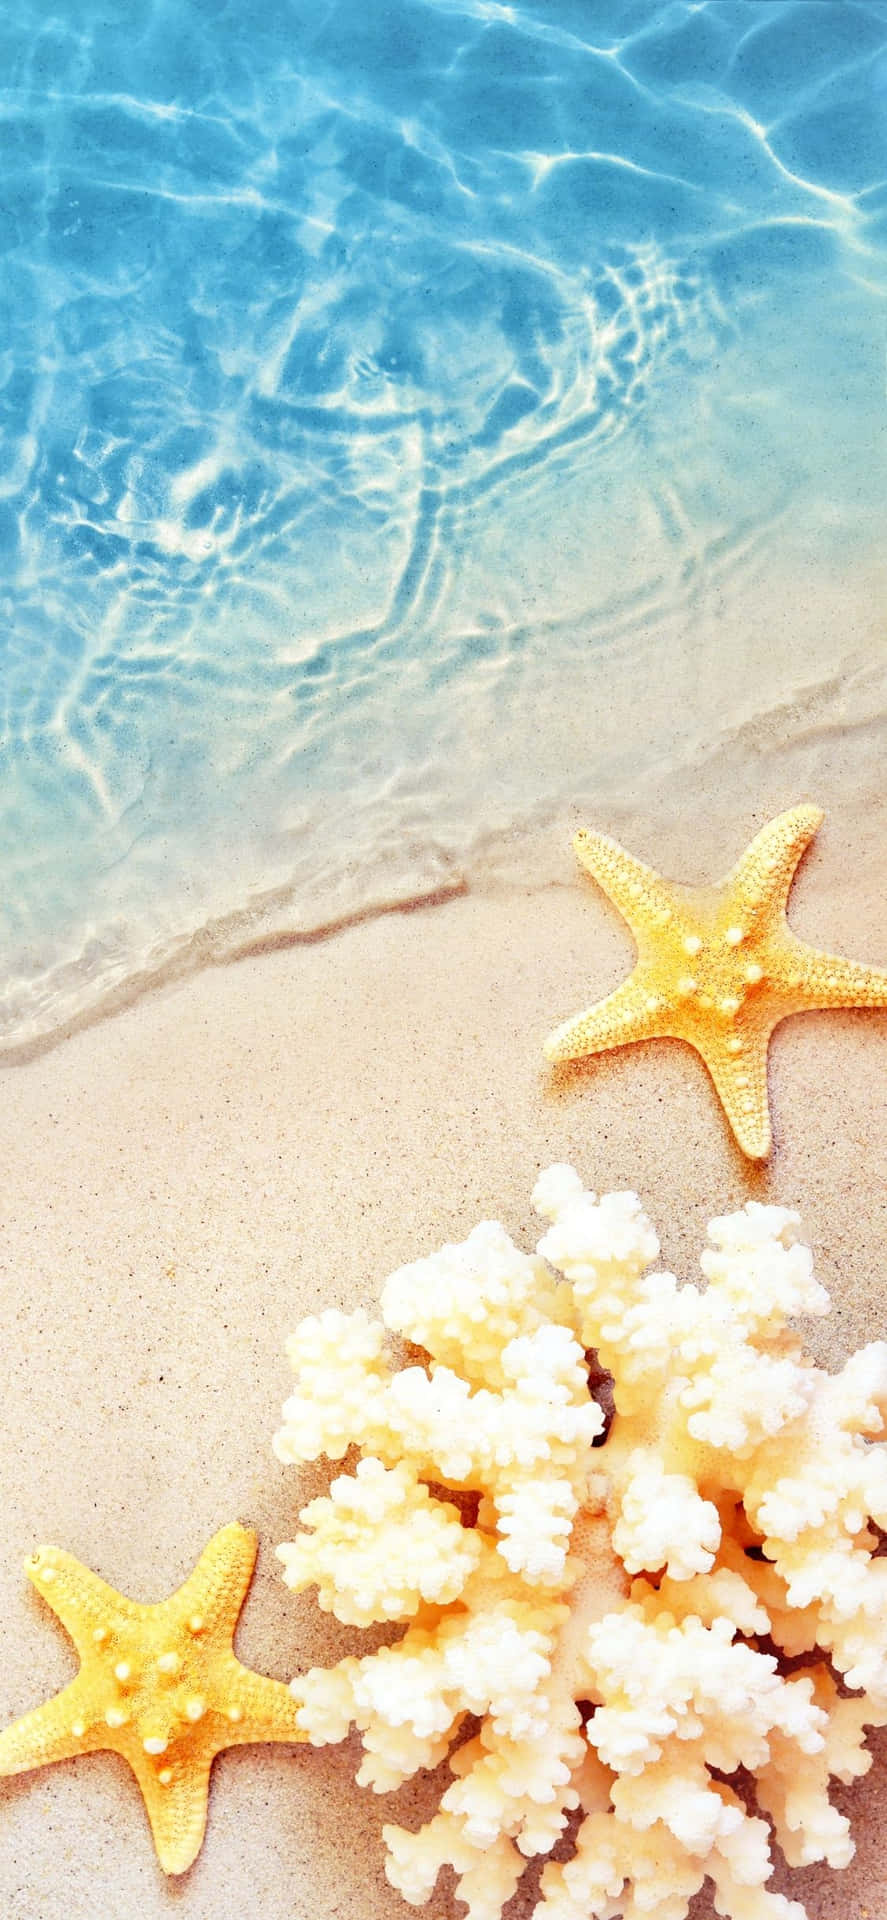 Download Iphone X Summer Background 1125 X 2436 | Wallpapers.com